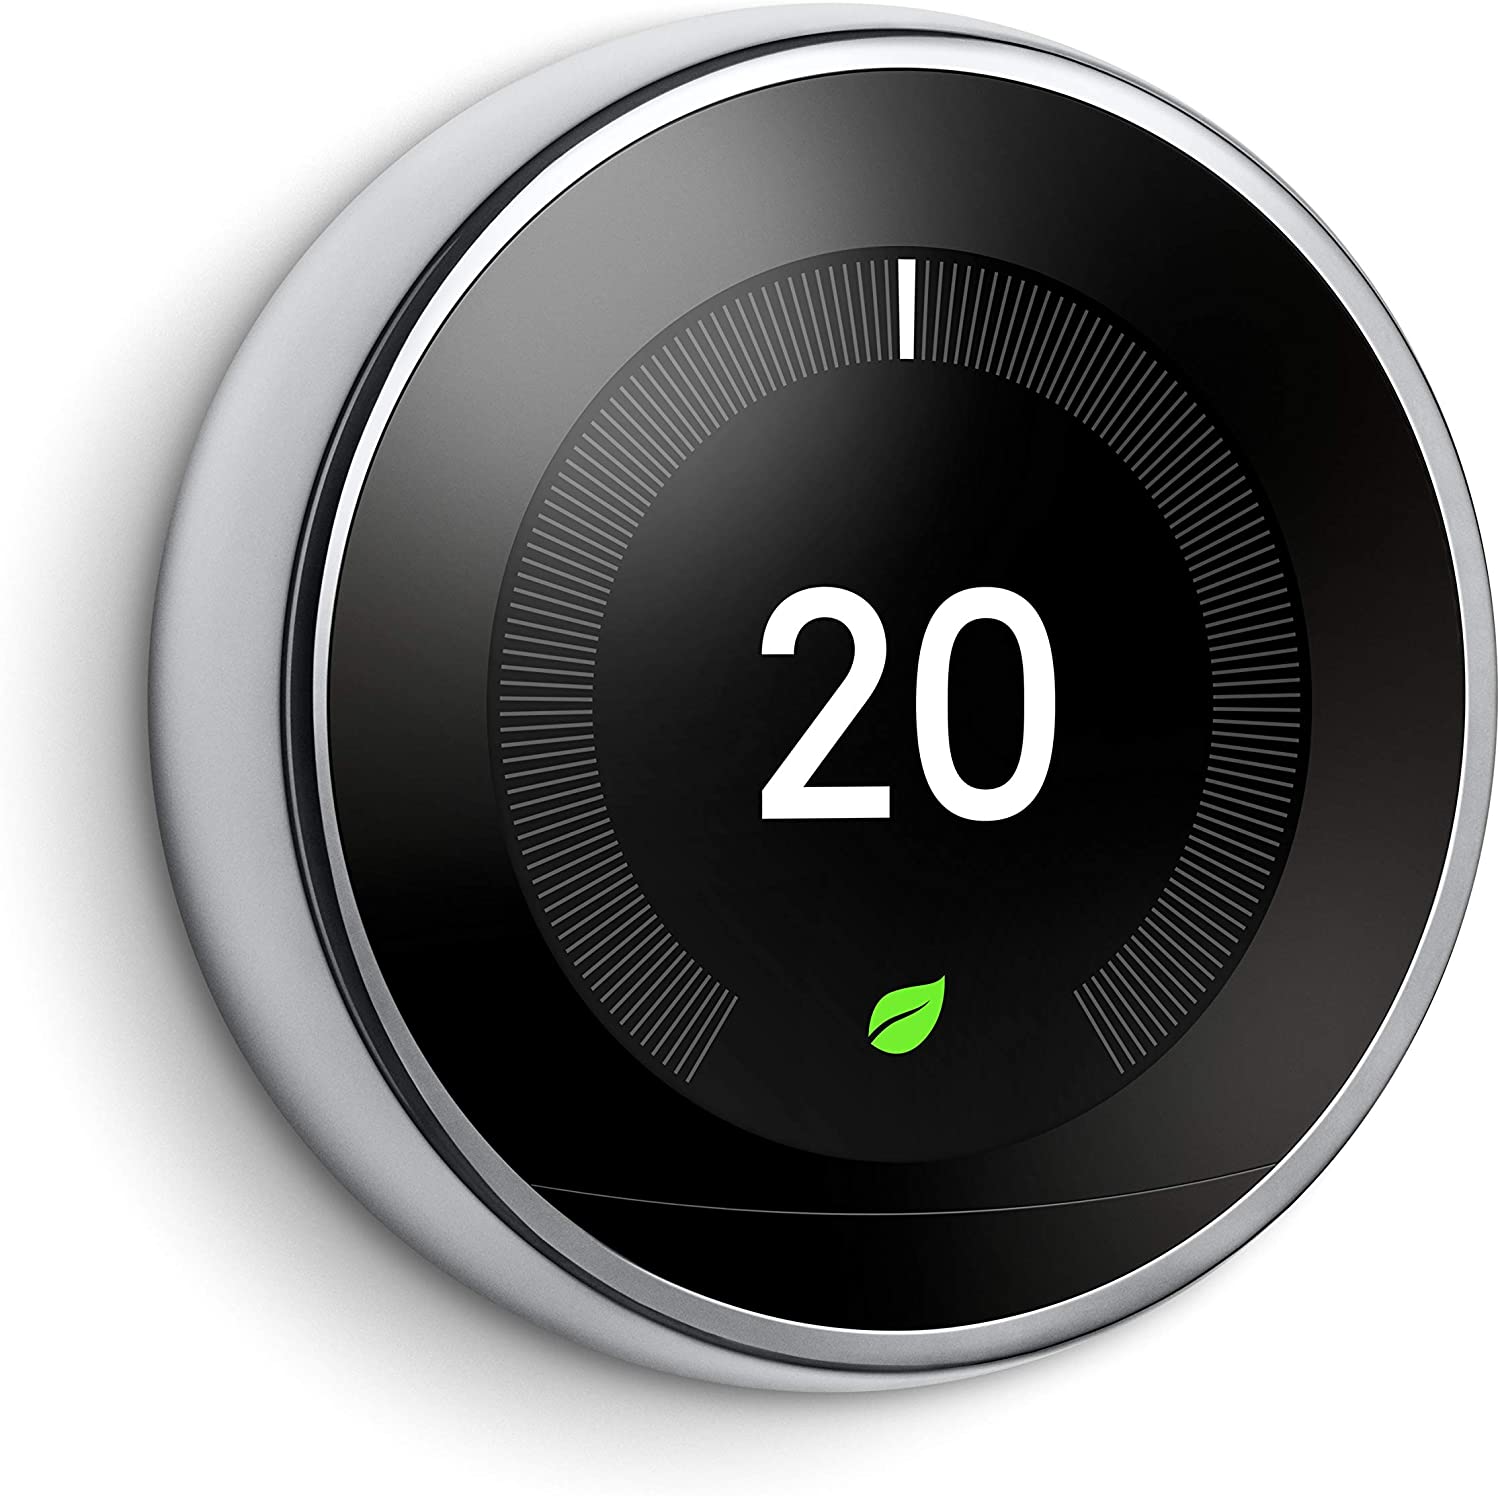 Nest Learning Thermostat 3rd Generation